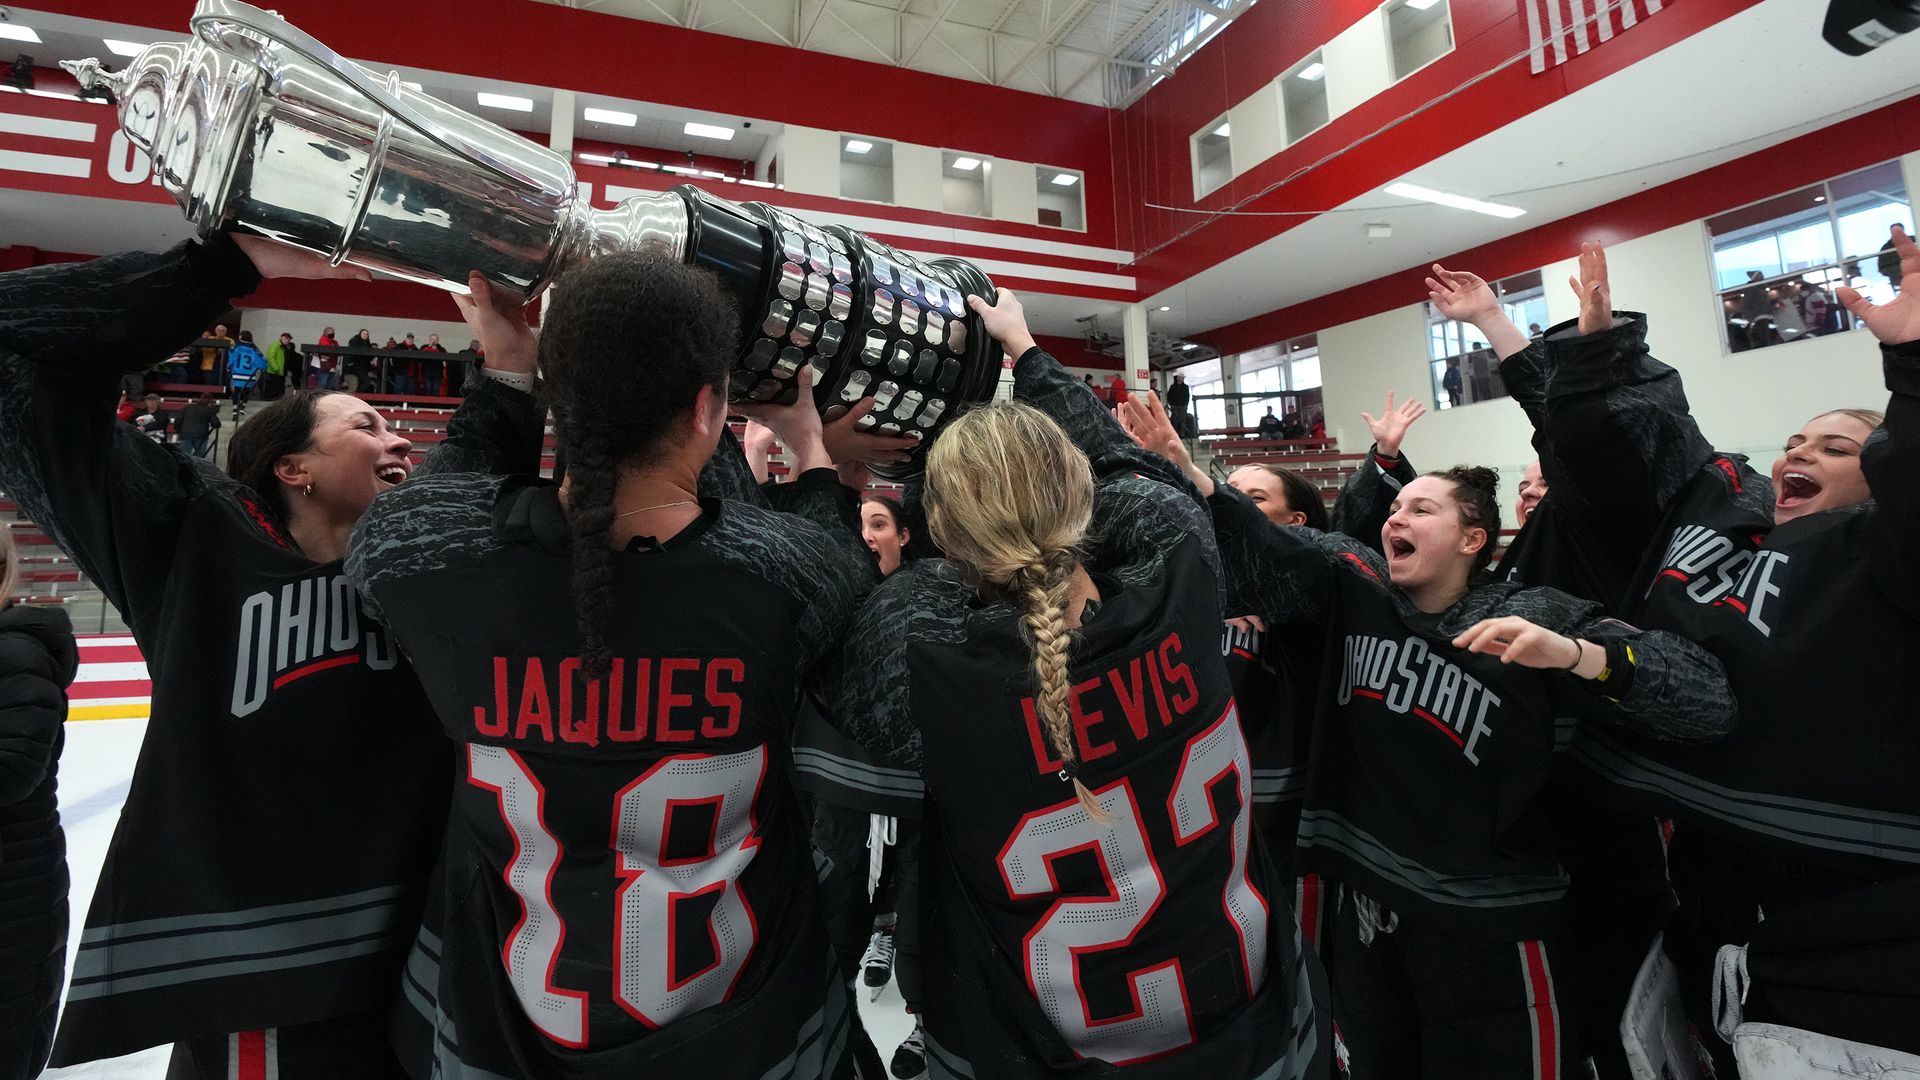 Ohio State women's hockey players hoist a trophy after winning the conference title. 